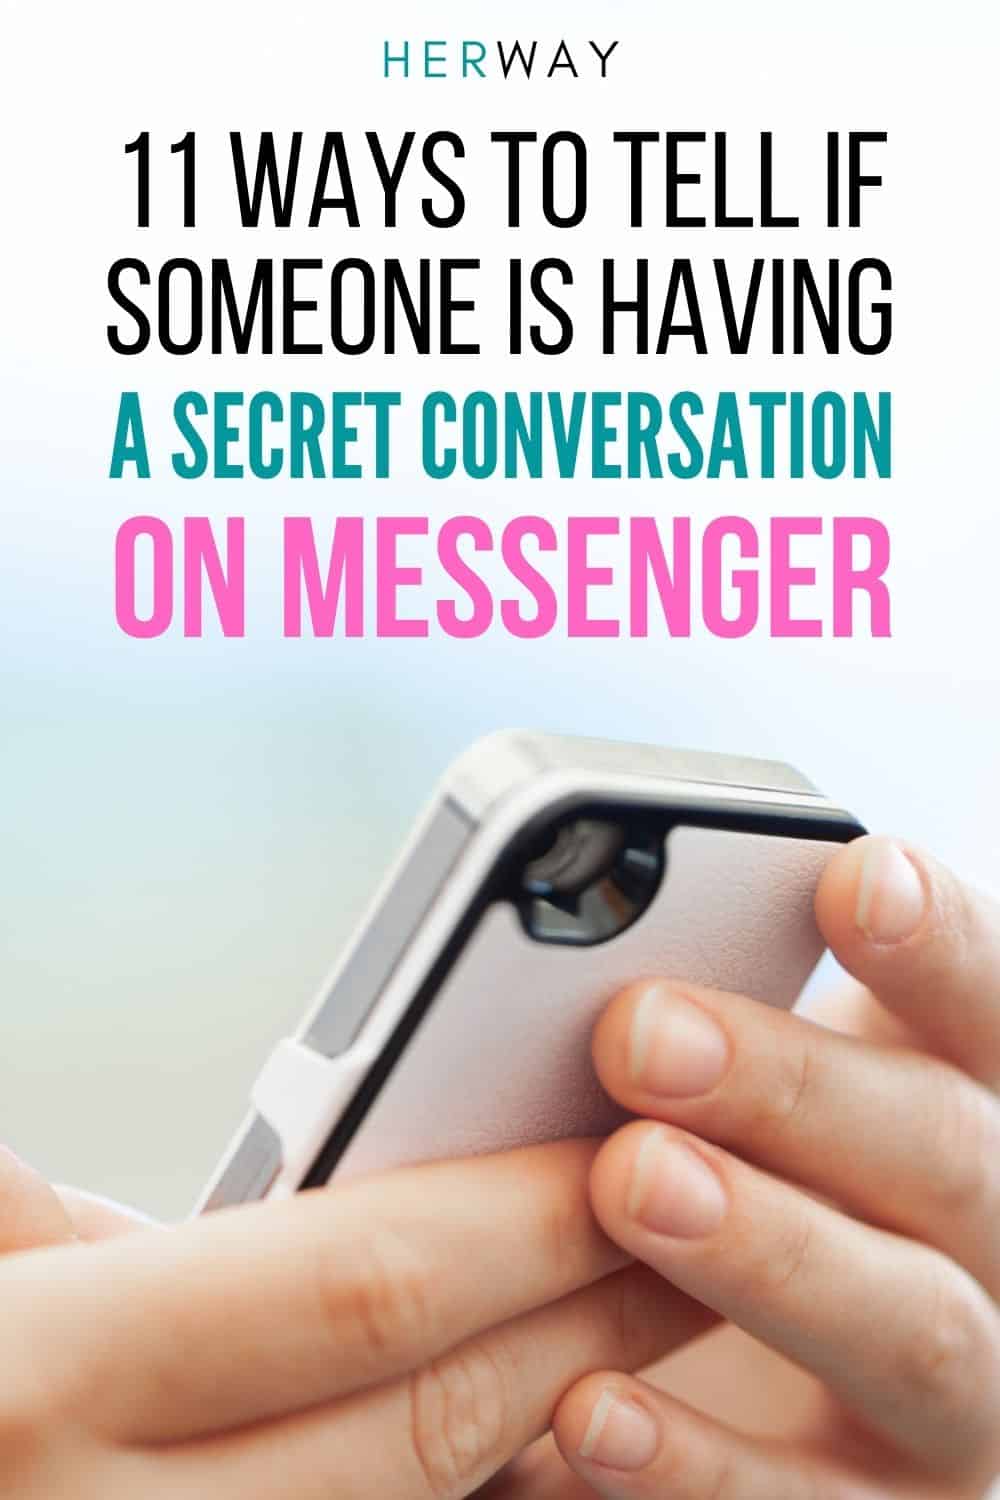 How To Tell If Someone Is Having Secret Conversations On Messenger Pinterest